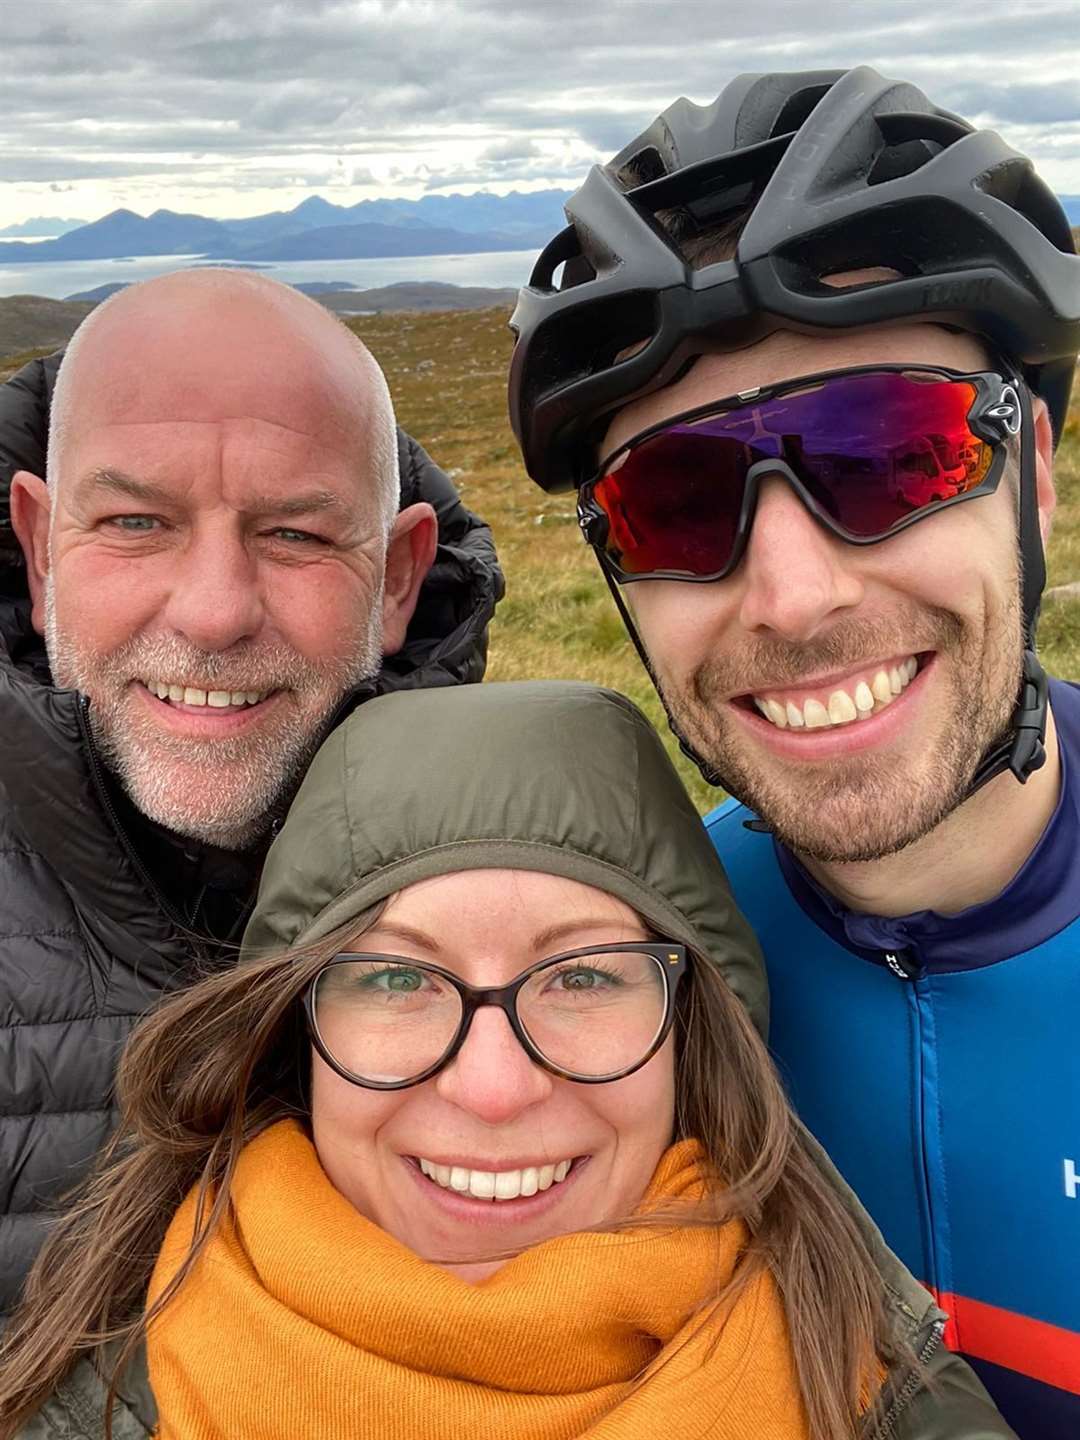 Sam with his dad John and wife Tessa on a stop.